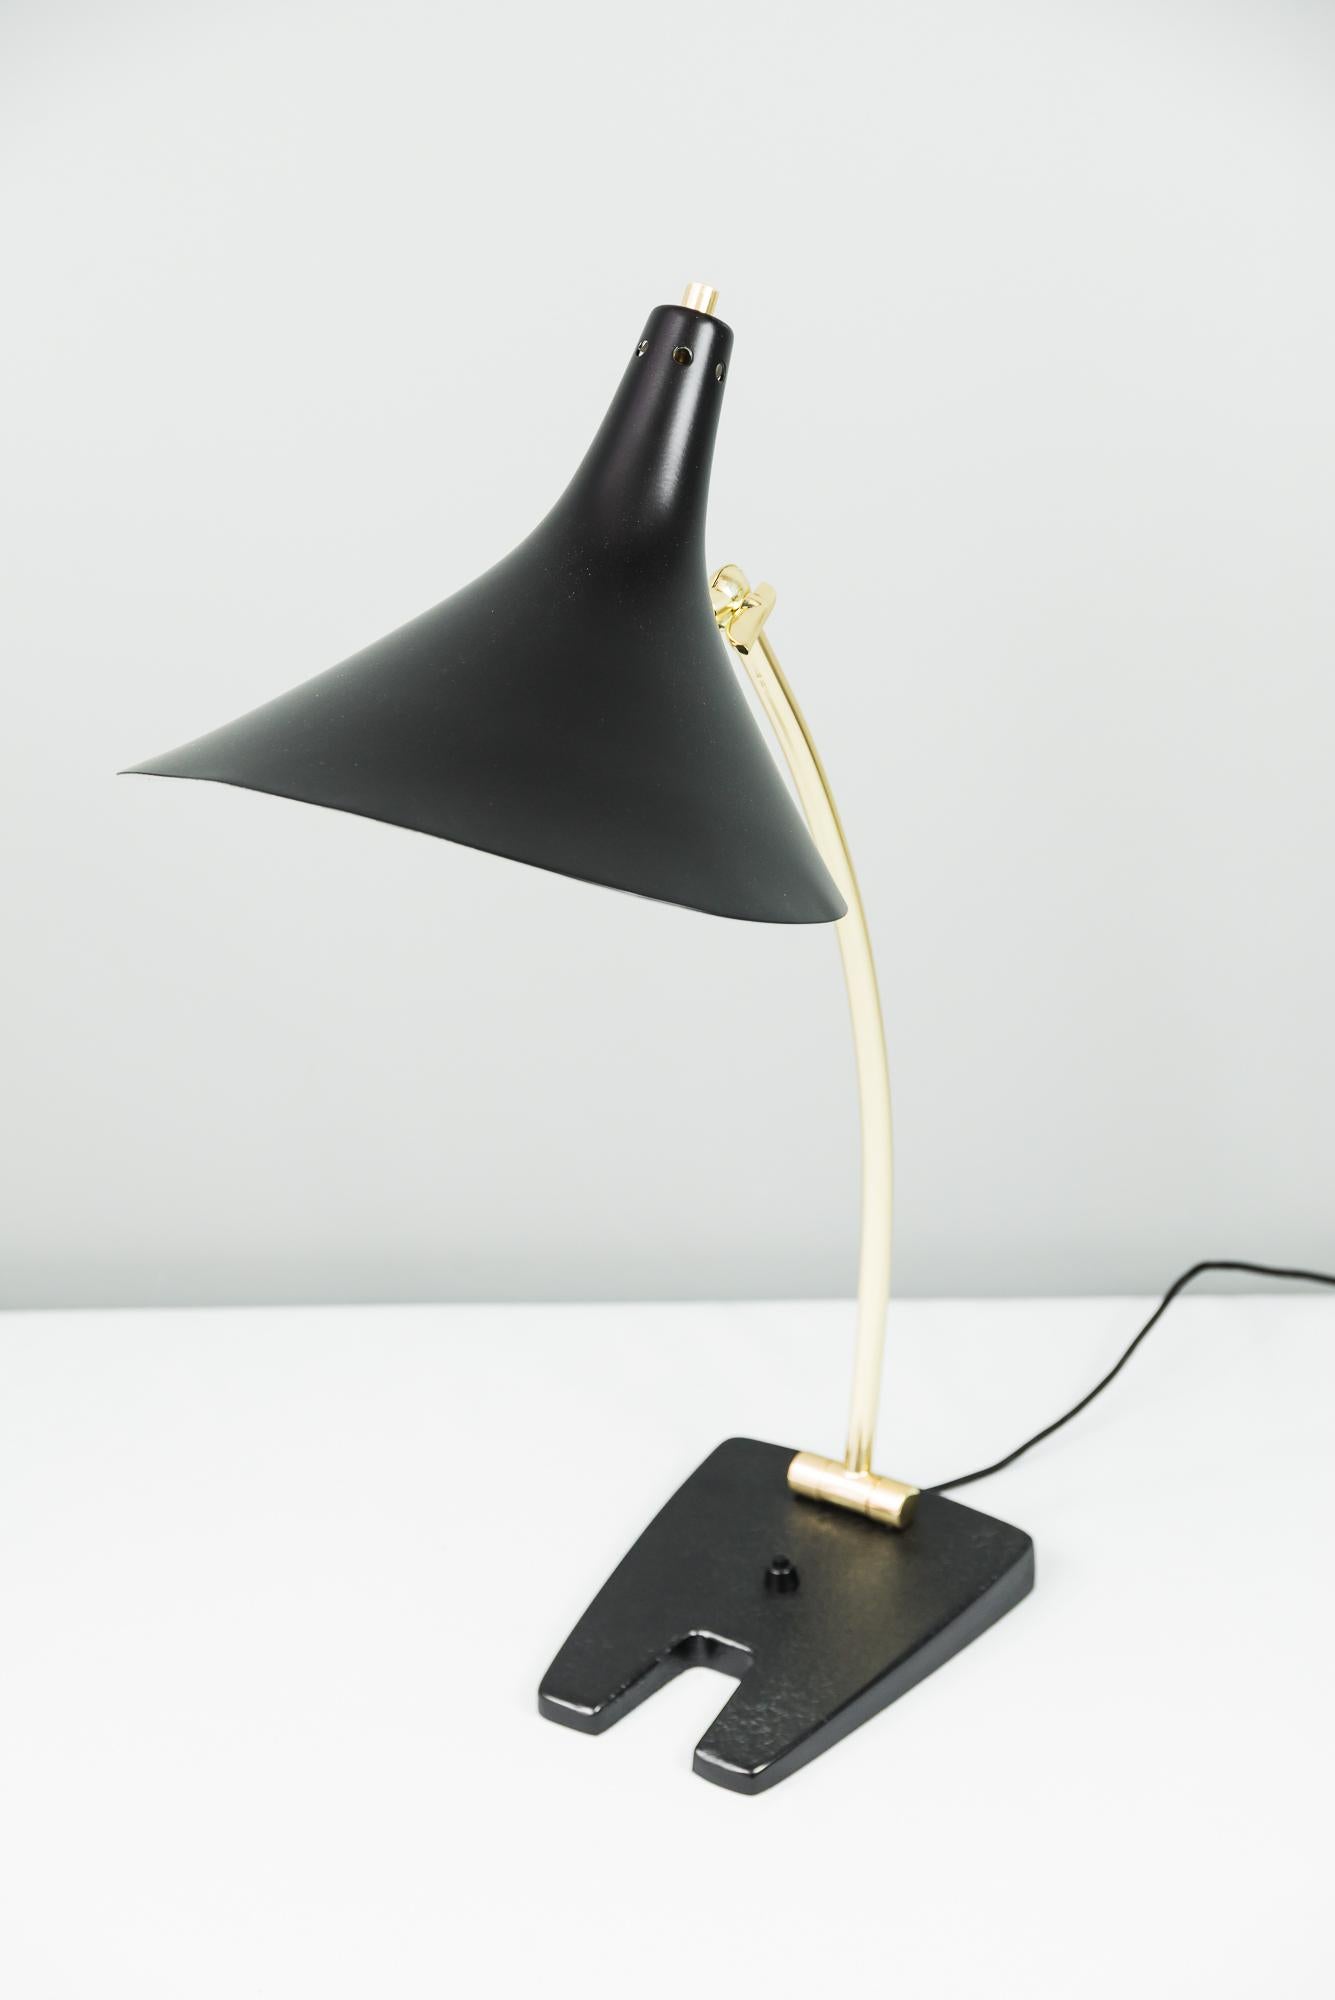 Movable table lamp, Italy, circa 1960s
Brass polished and stove enamelled
Metal (painted)
Measure: Deep (tilted) 66cm.